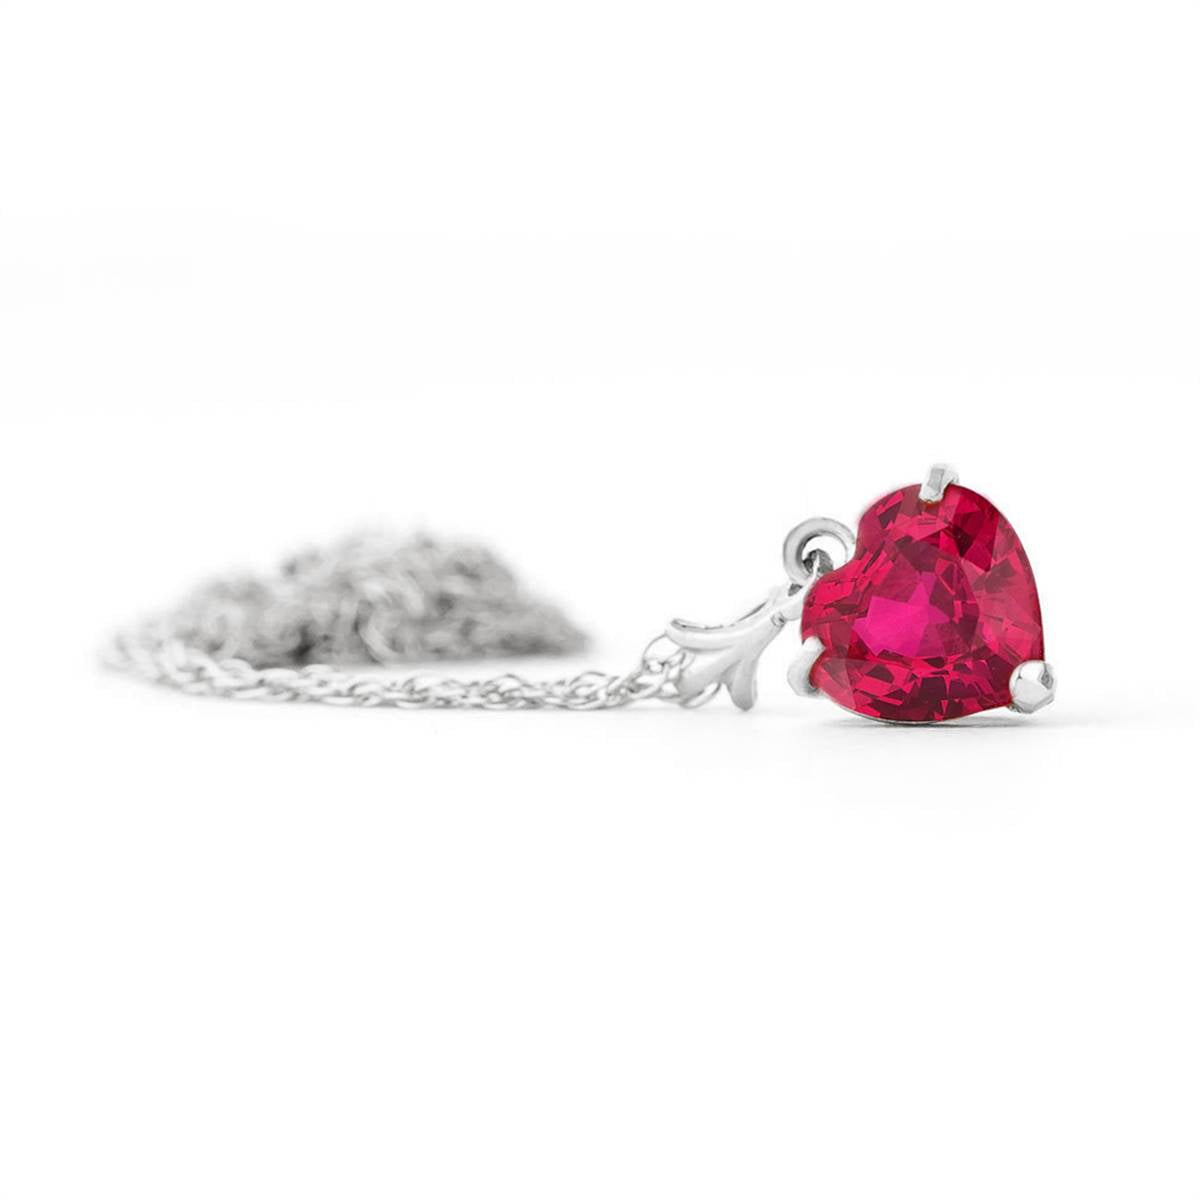 1.45 Carat 14K Solid White Gold Necklace Natural Heart Ruby